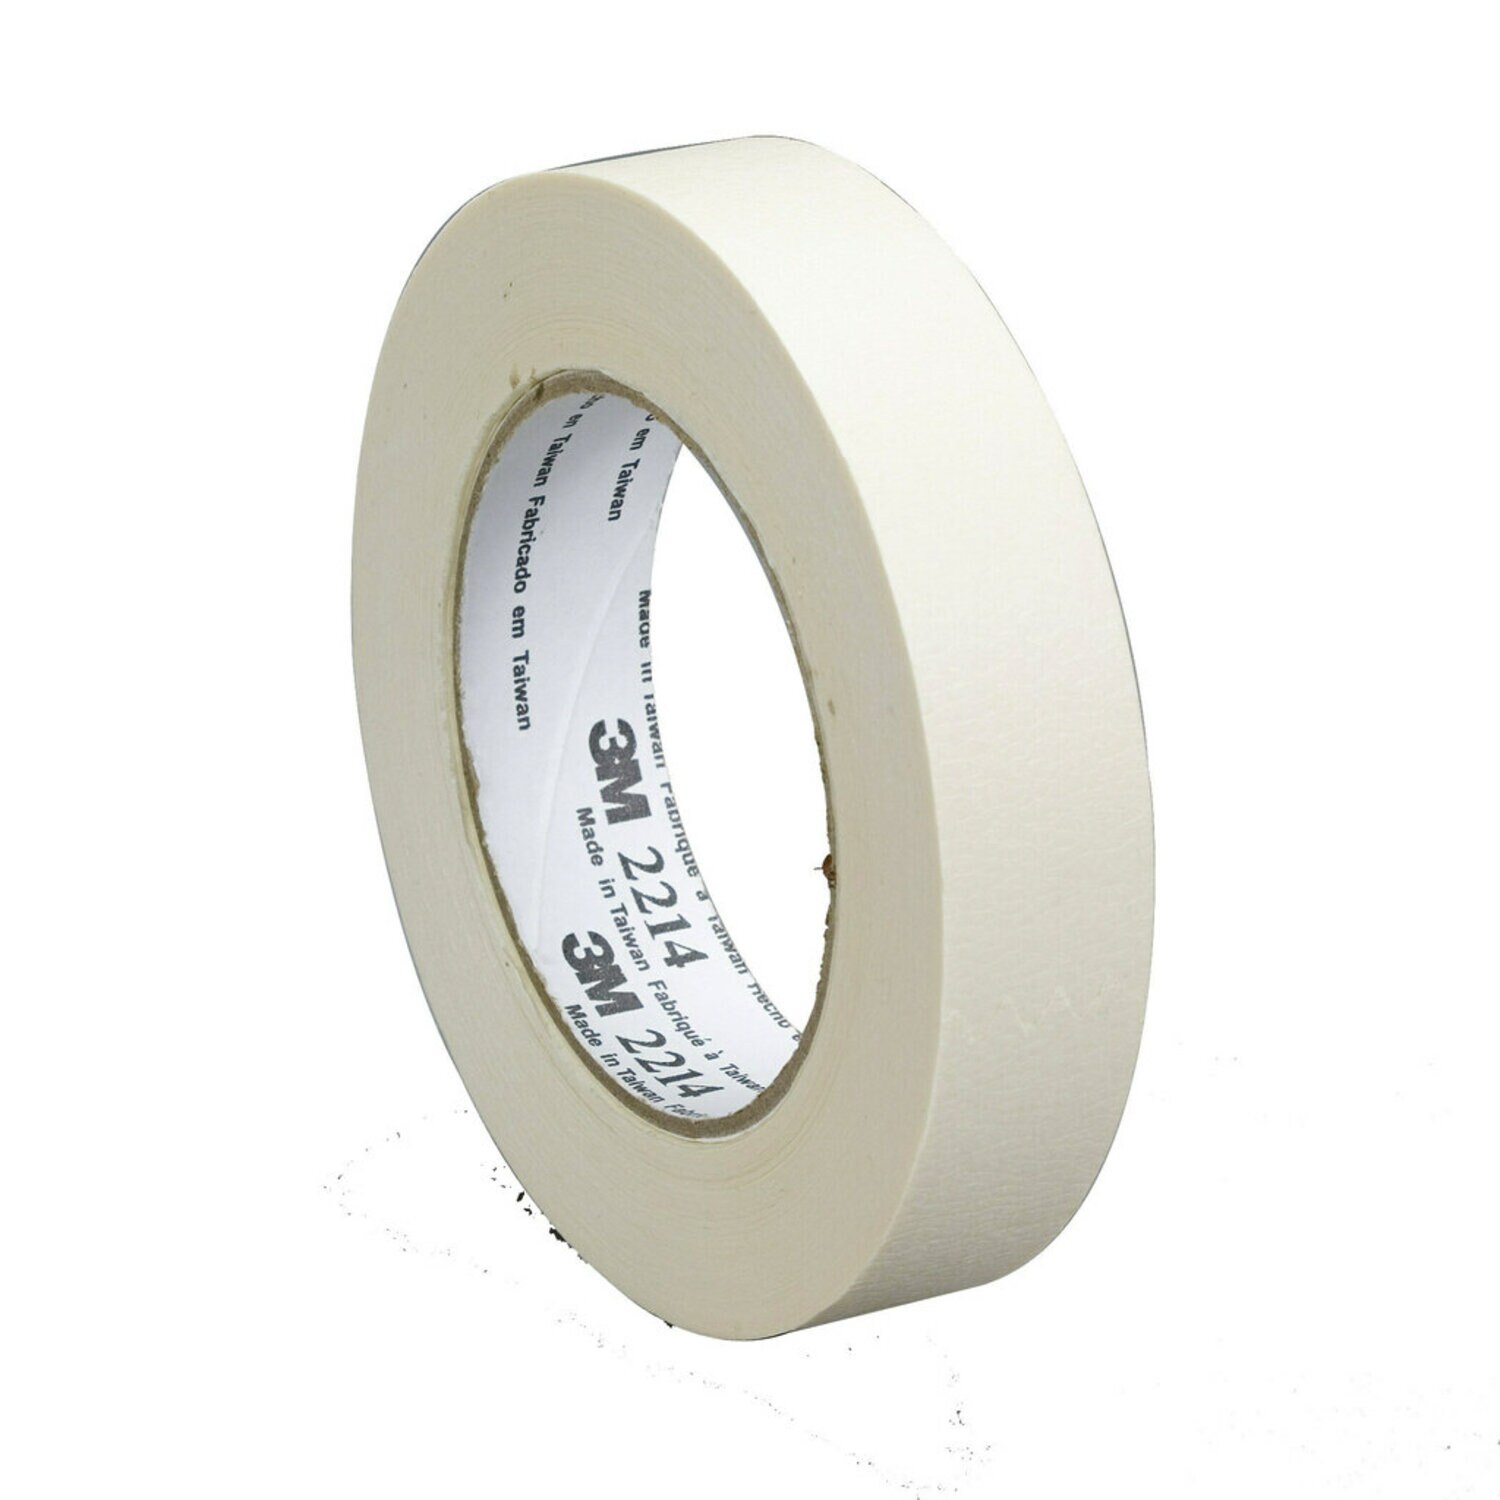 WOD GPM-63 Masking Tape 2 Inch for General Purpose/Painting - 1 Roll - 60  Yards per roll